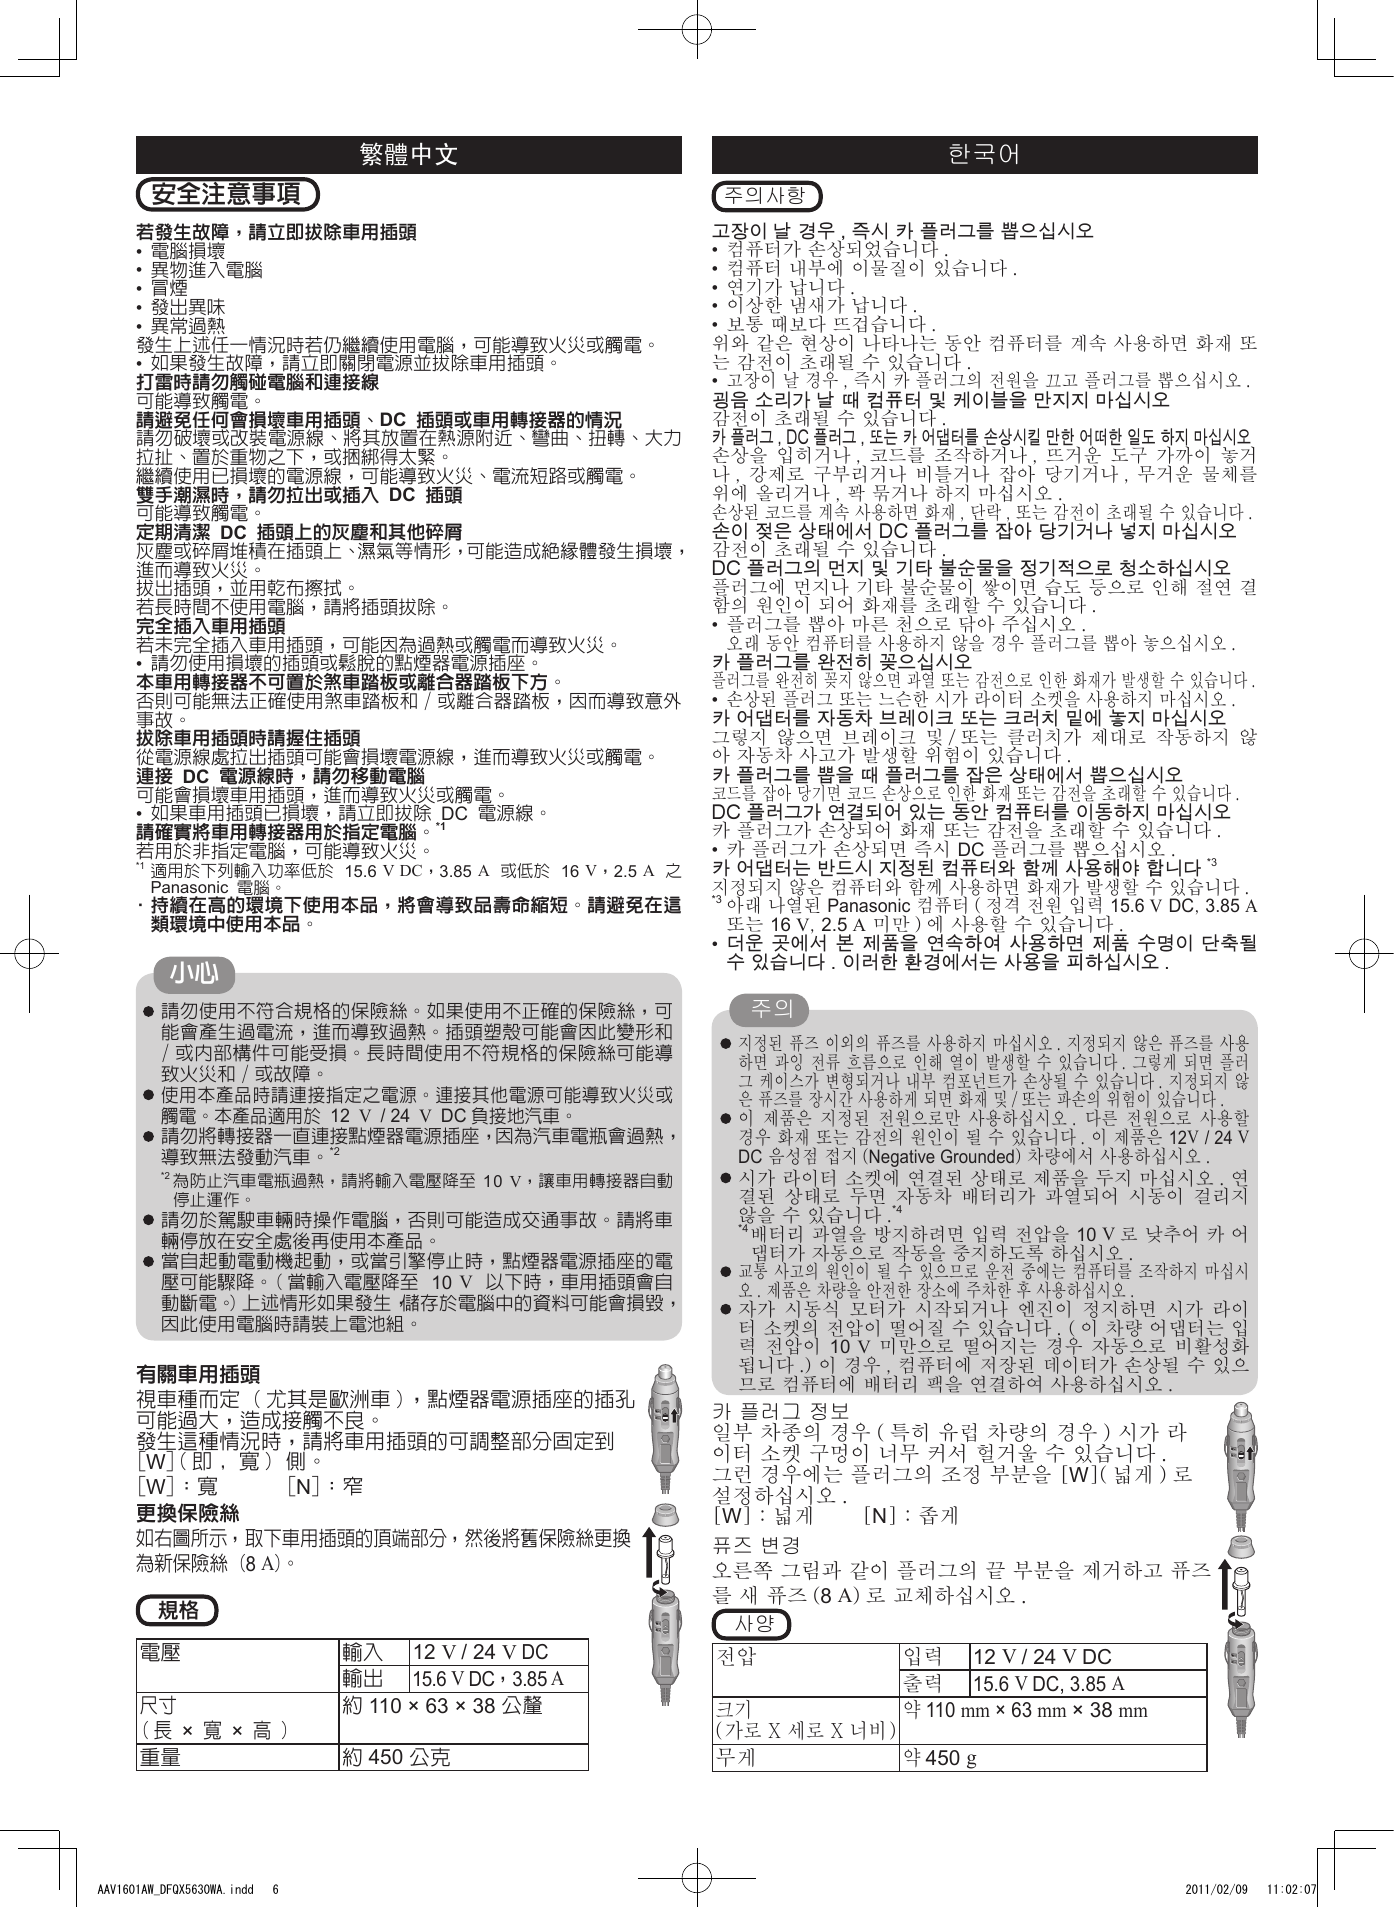 Page 5 of 8 - Panasonic CF-AAxxxx (AC Adapter) 使用手册 : Operating Instructions (English/ German/ French/ Chinese[S]/ Chinese[T]/ Korean/ Japanese) (Revision) Aav1601aw-oi-dfqx5630wa-non-nonlogo-JMGFCSCTKO-p20110072